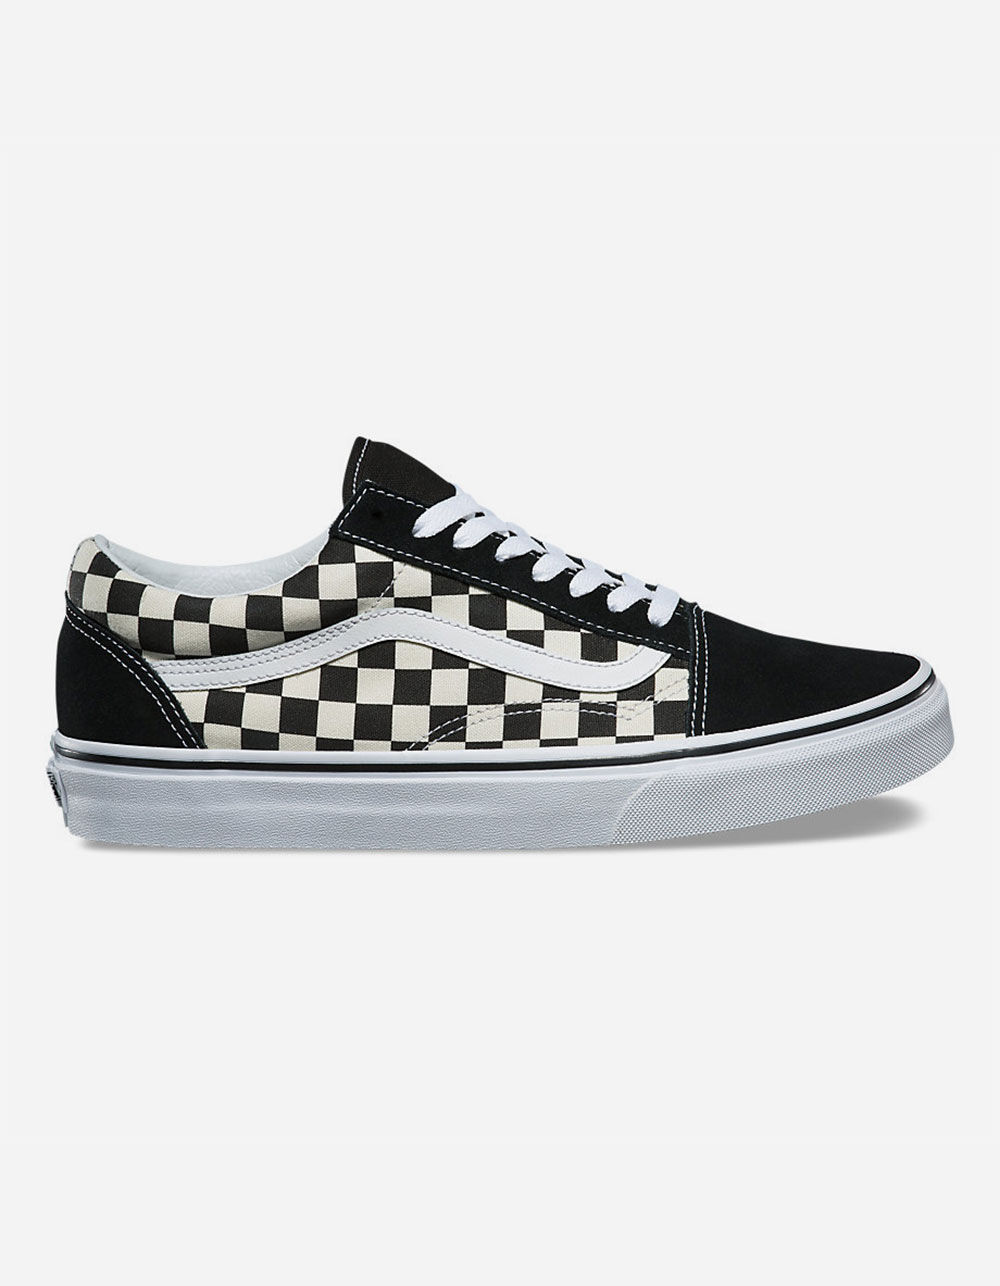 Vans Old Skool Black/White Checkerboard Lace Up Skate Shoes Size Mens 8